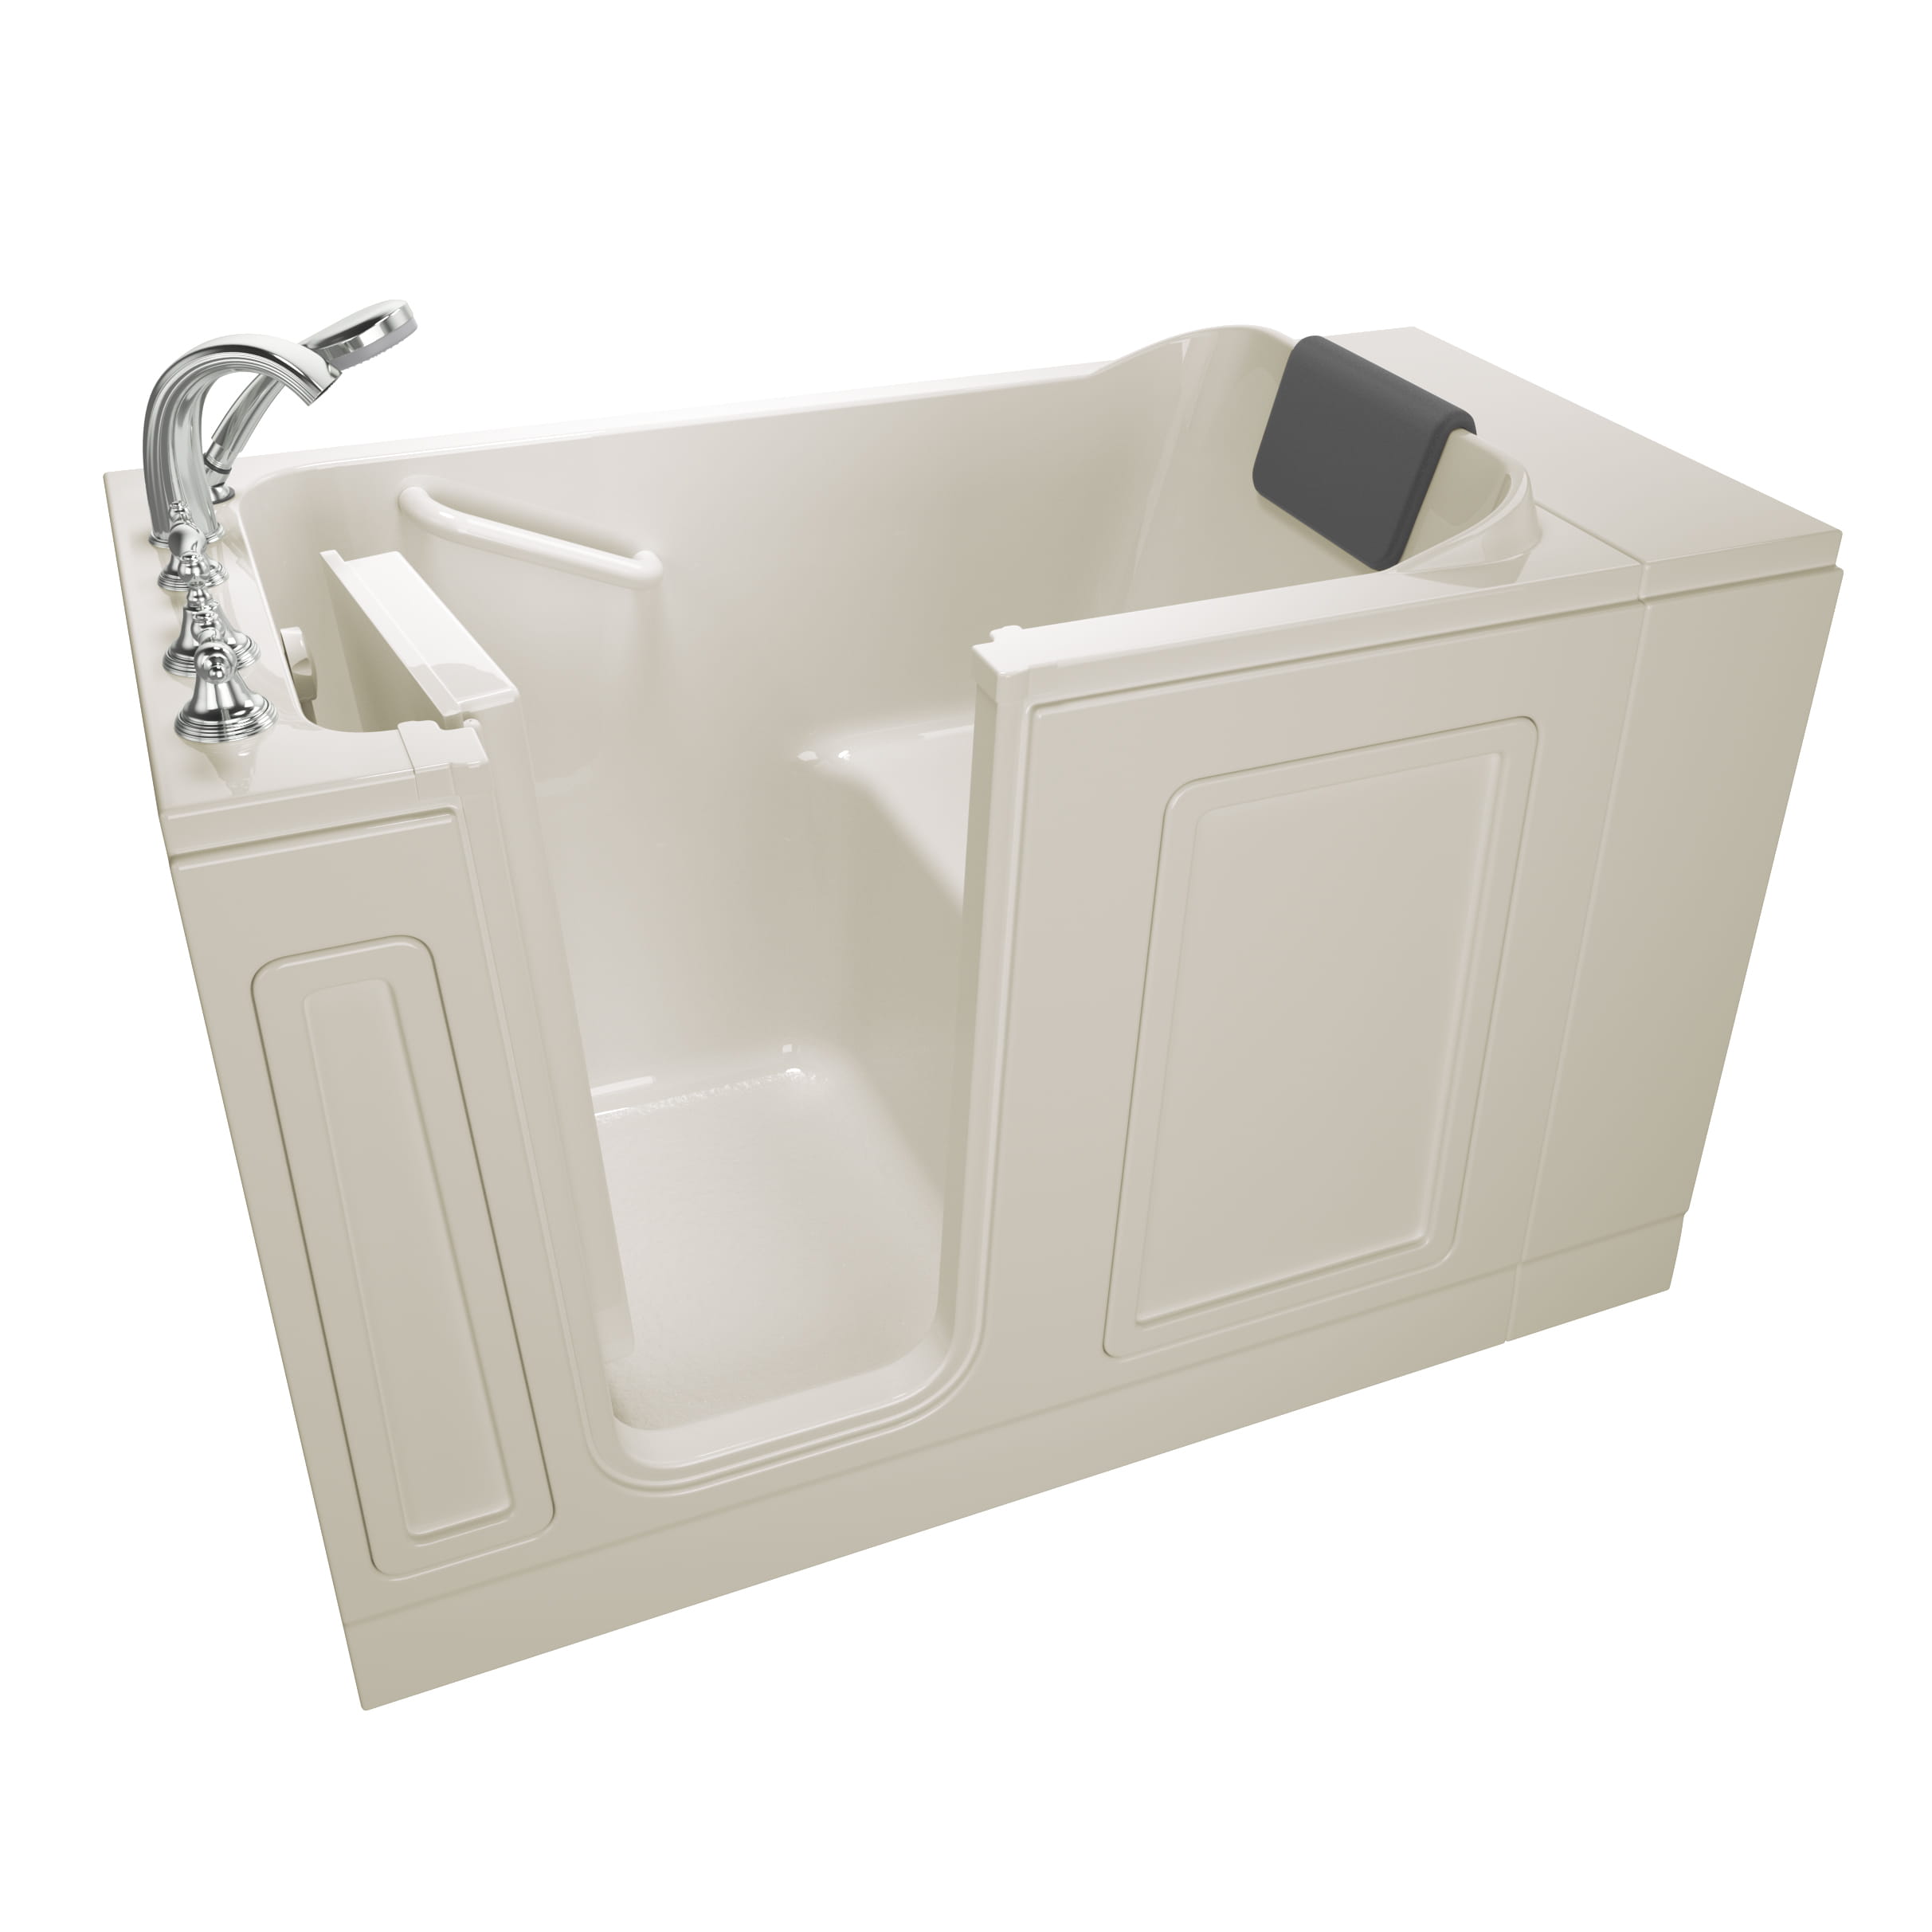 Acrylic Luxury Series 30 x 51  Inch Walk in Tub With Soaker System   Left Hand Drain With Faucet WIB LINEN